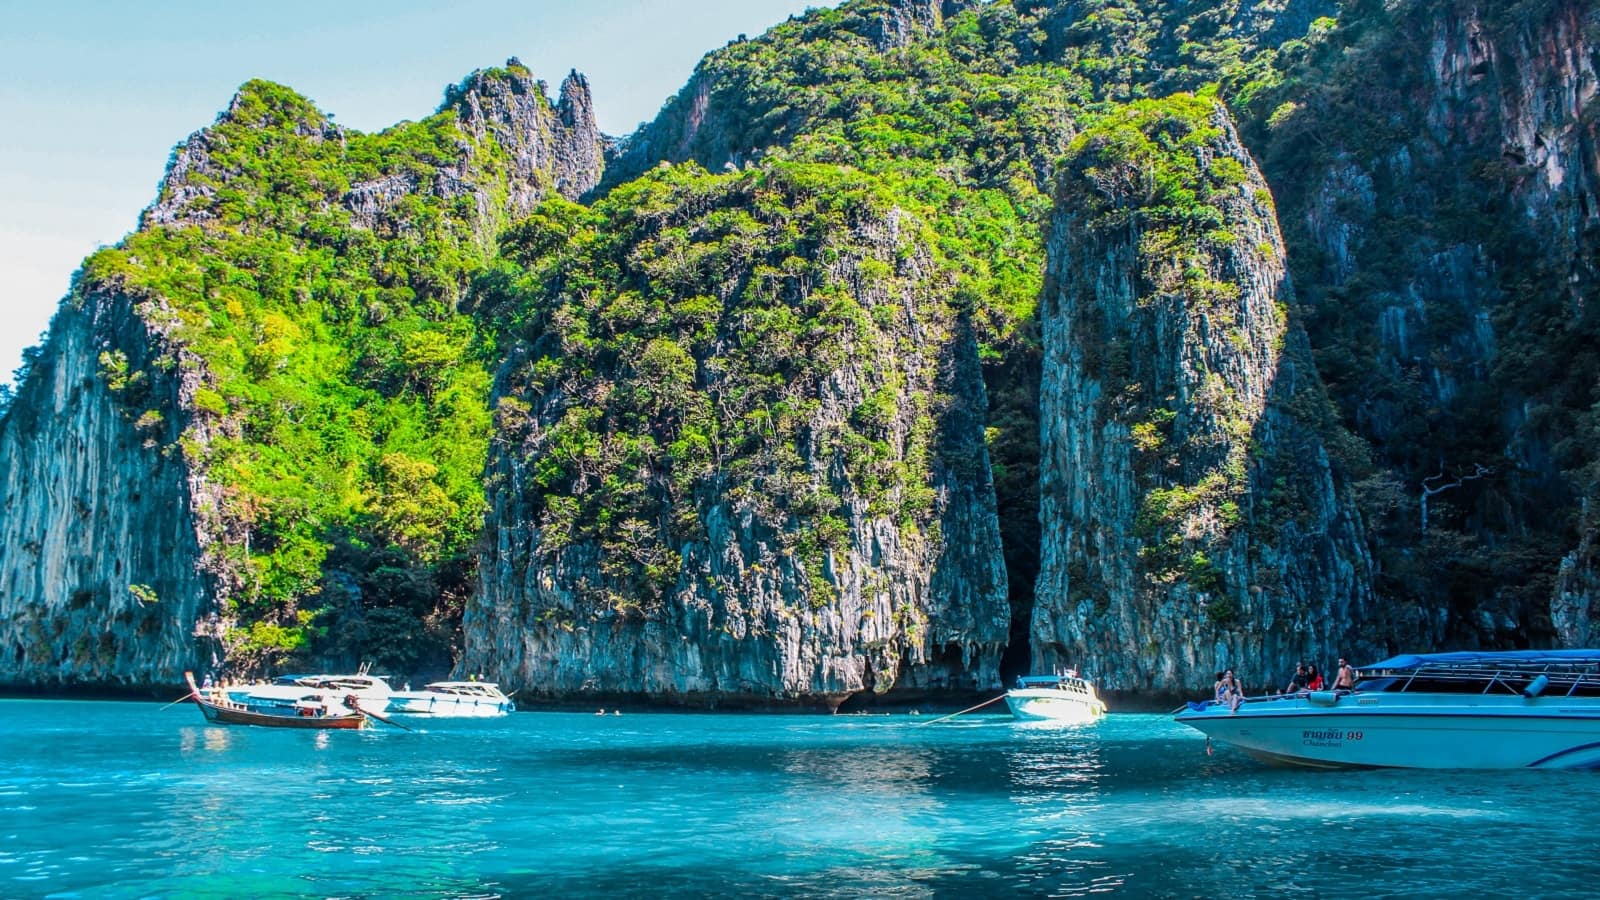 Island Hopping in the Phi Phi Islands · Asian Trails